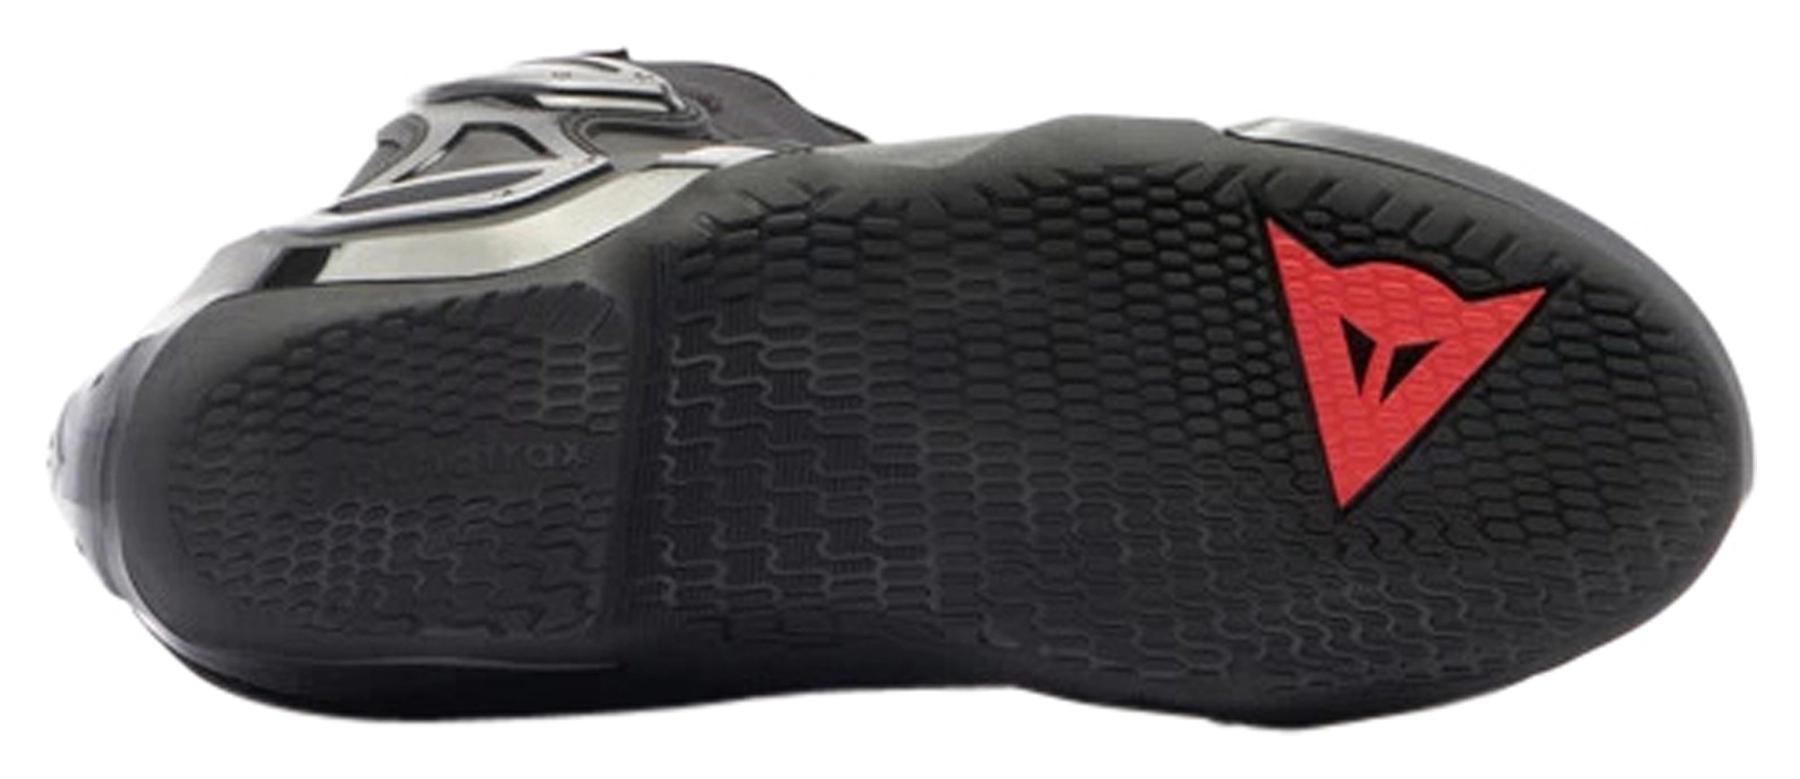 STIVALI DAINESE AXIAL 2